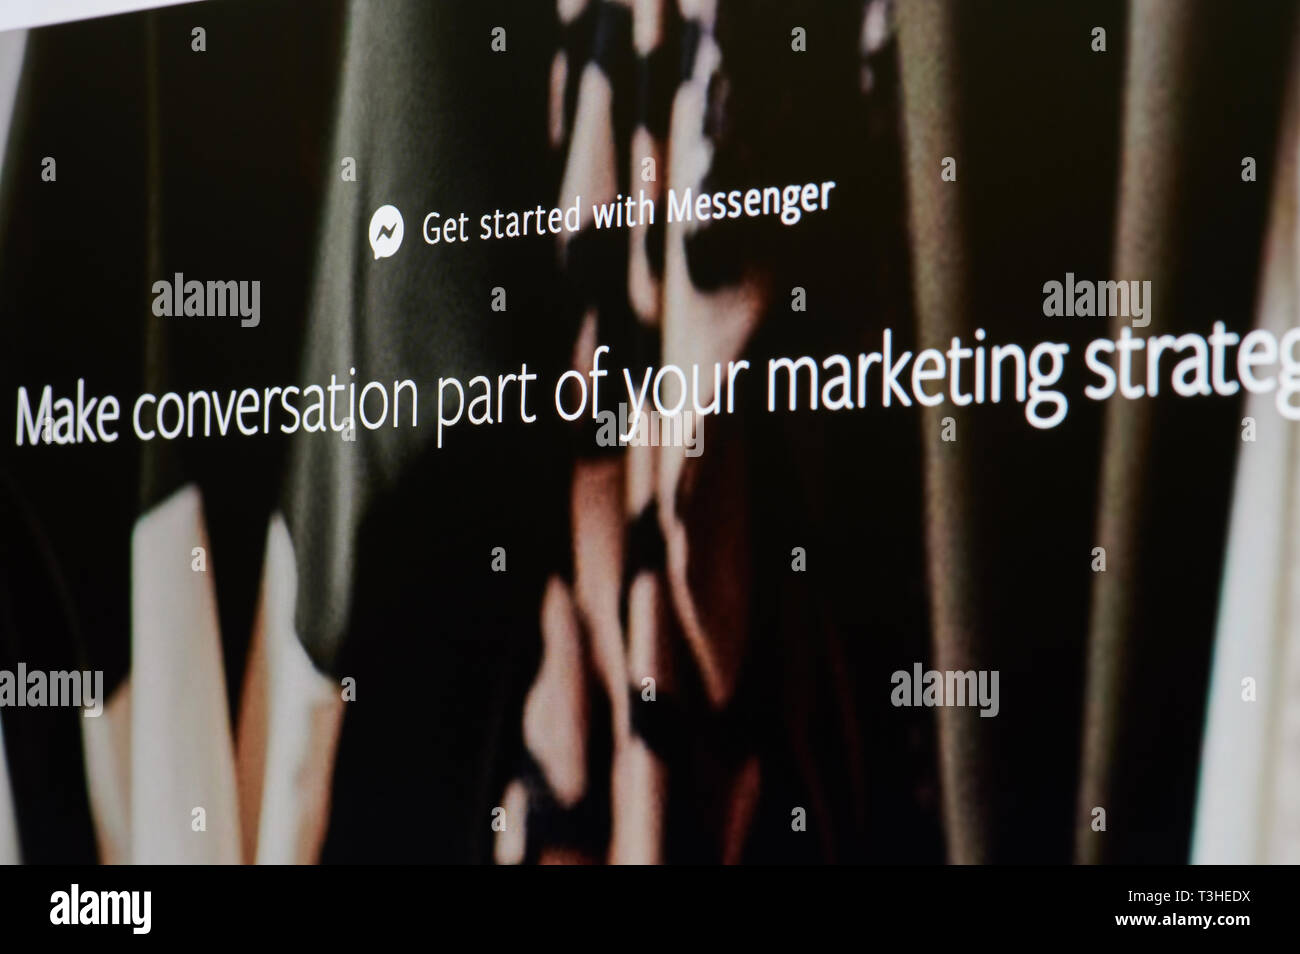 New york, USA - april 8, 2019: Get started with facebook messenger ads on digital screen macro close up view Stock Photo